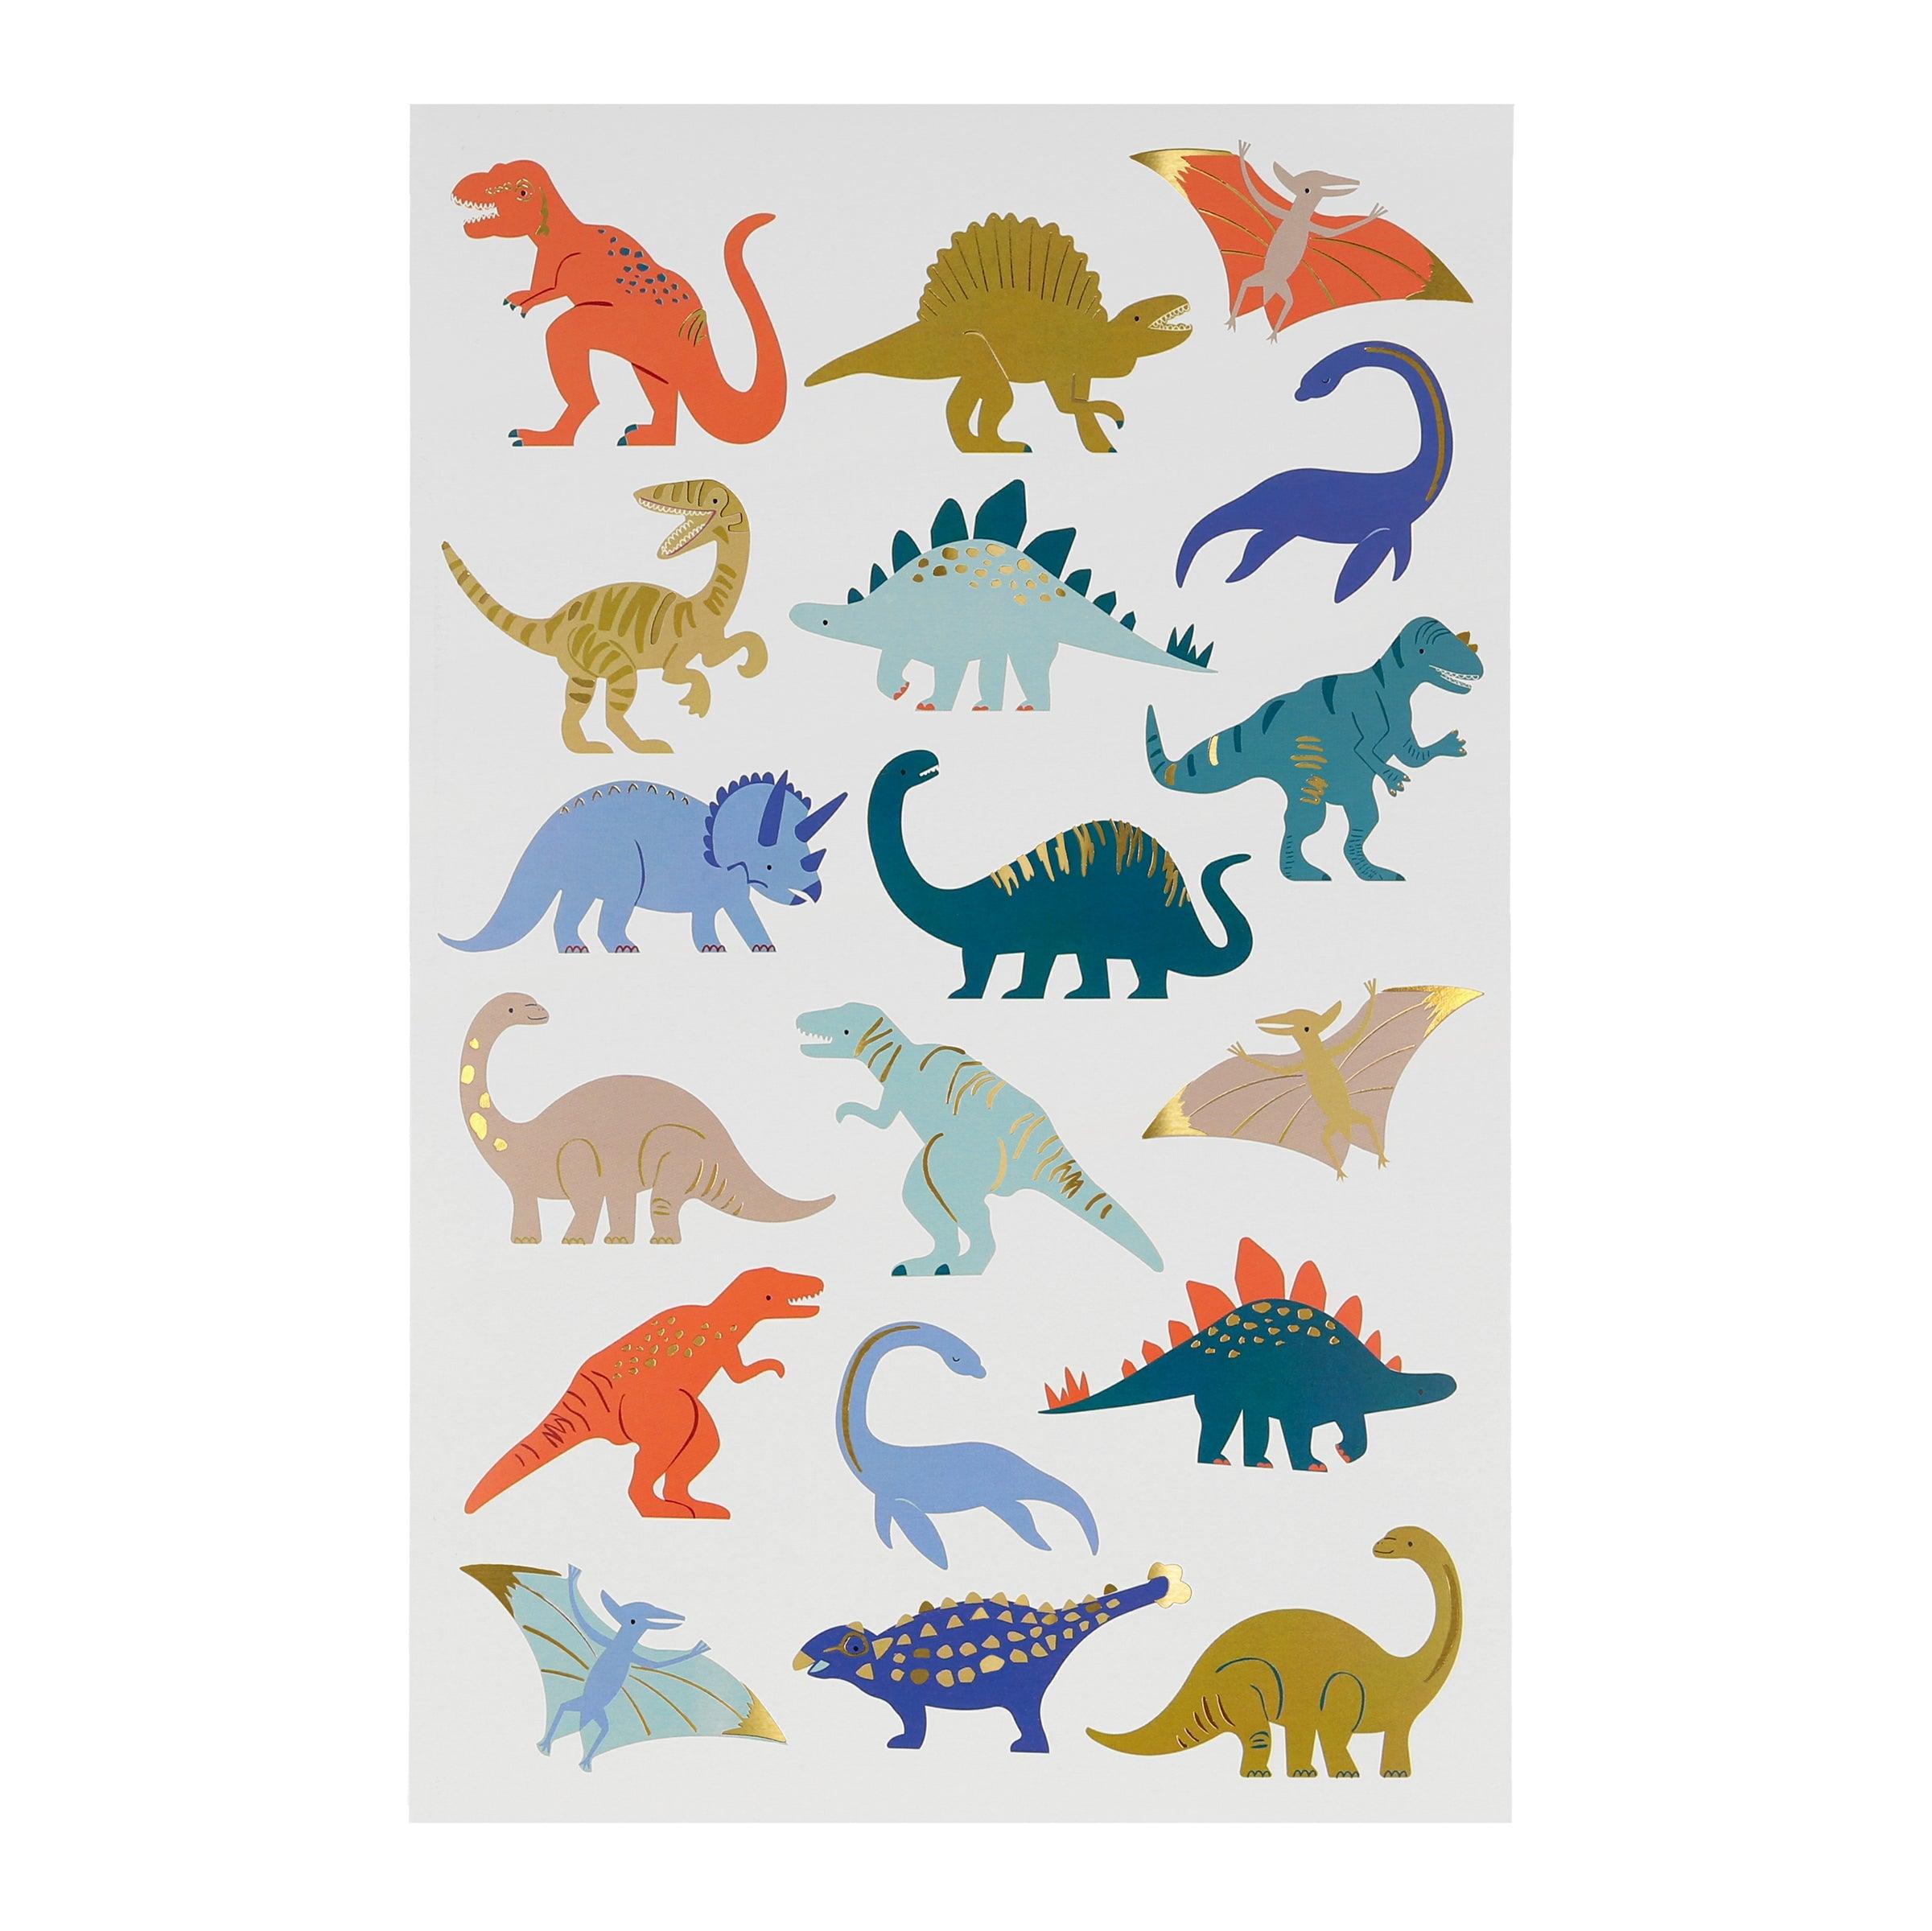 Dinosaurs Tattoo Sheets (x 2 sheets) - Why and Whale